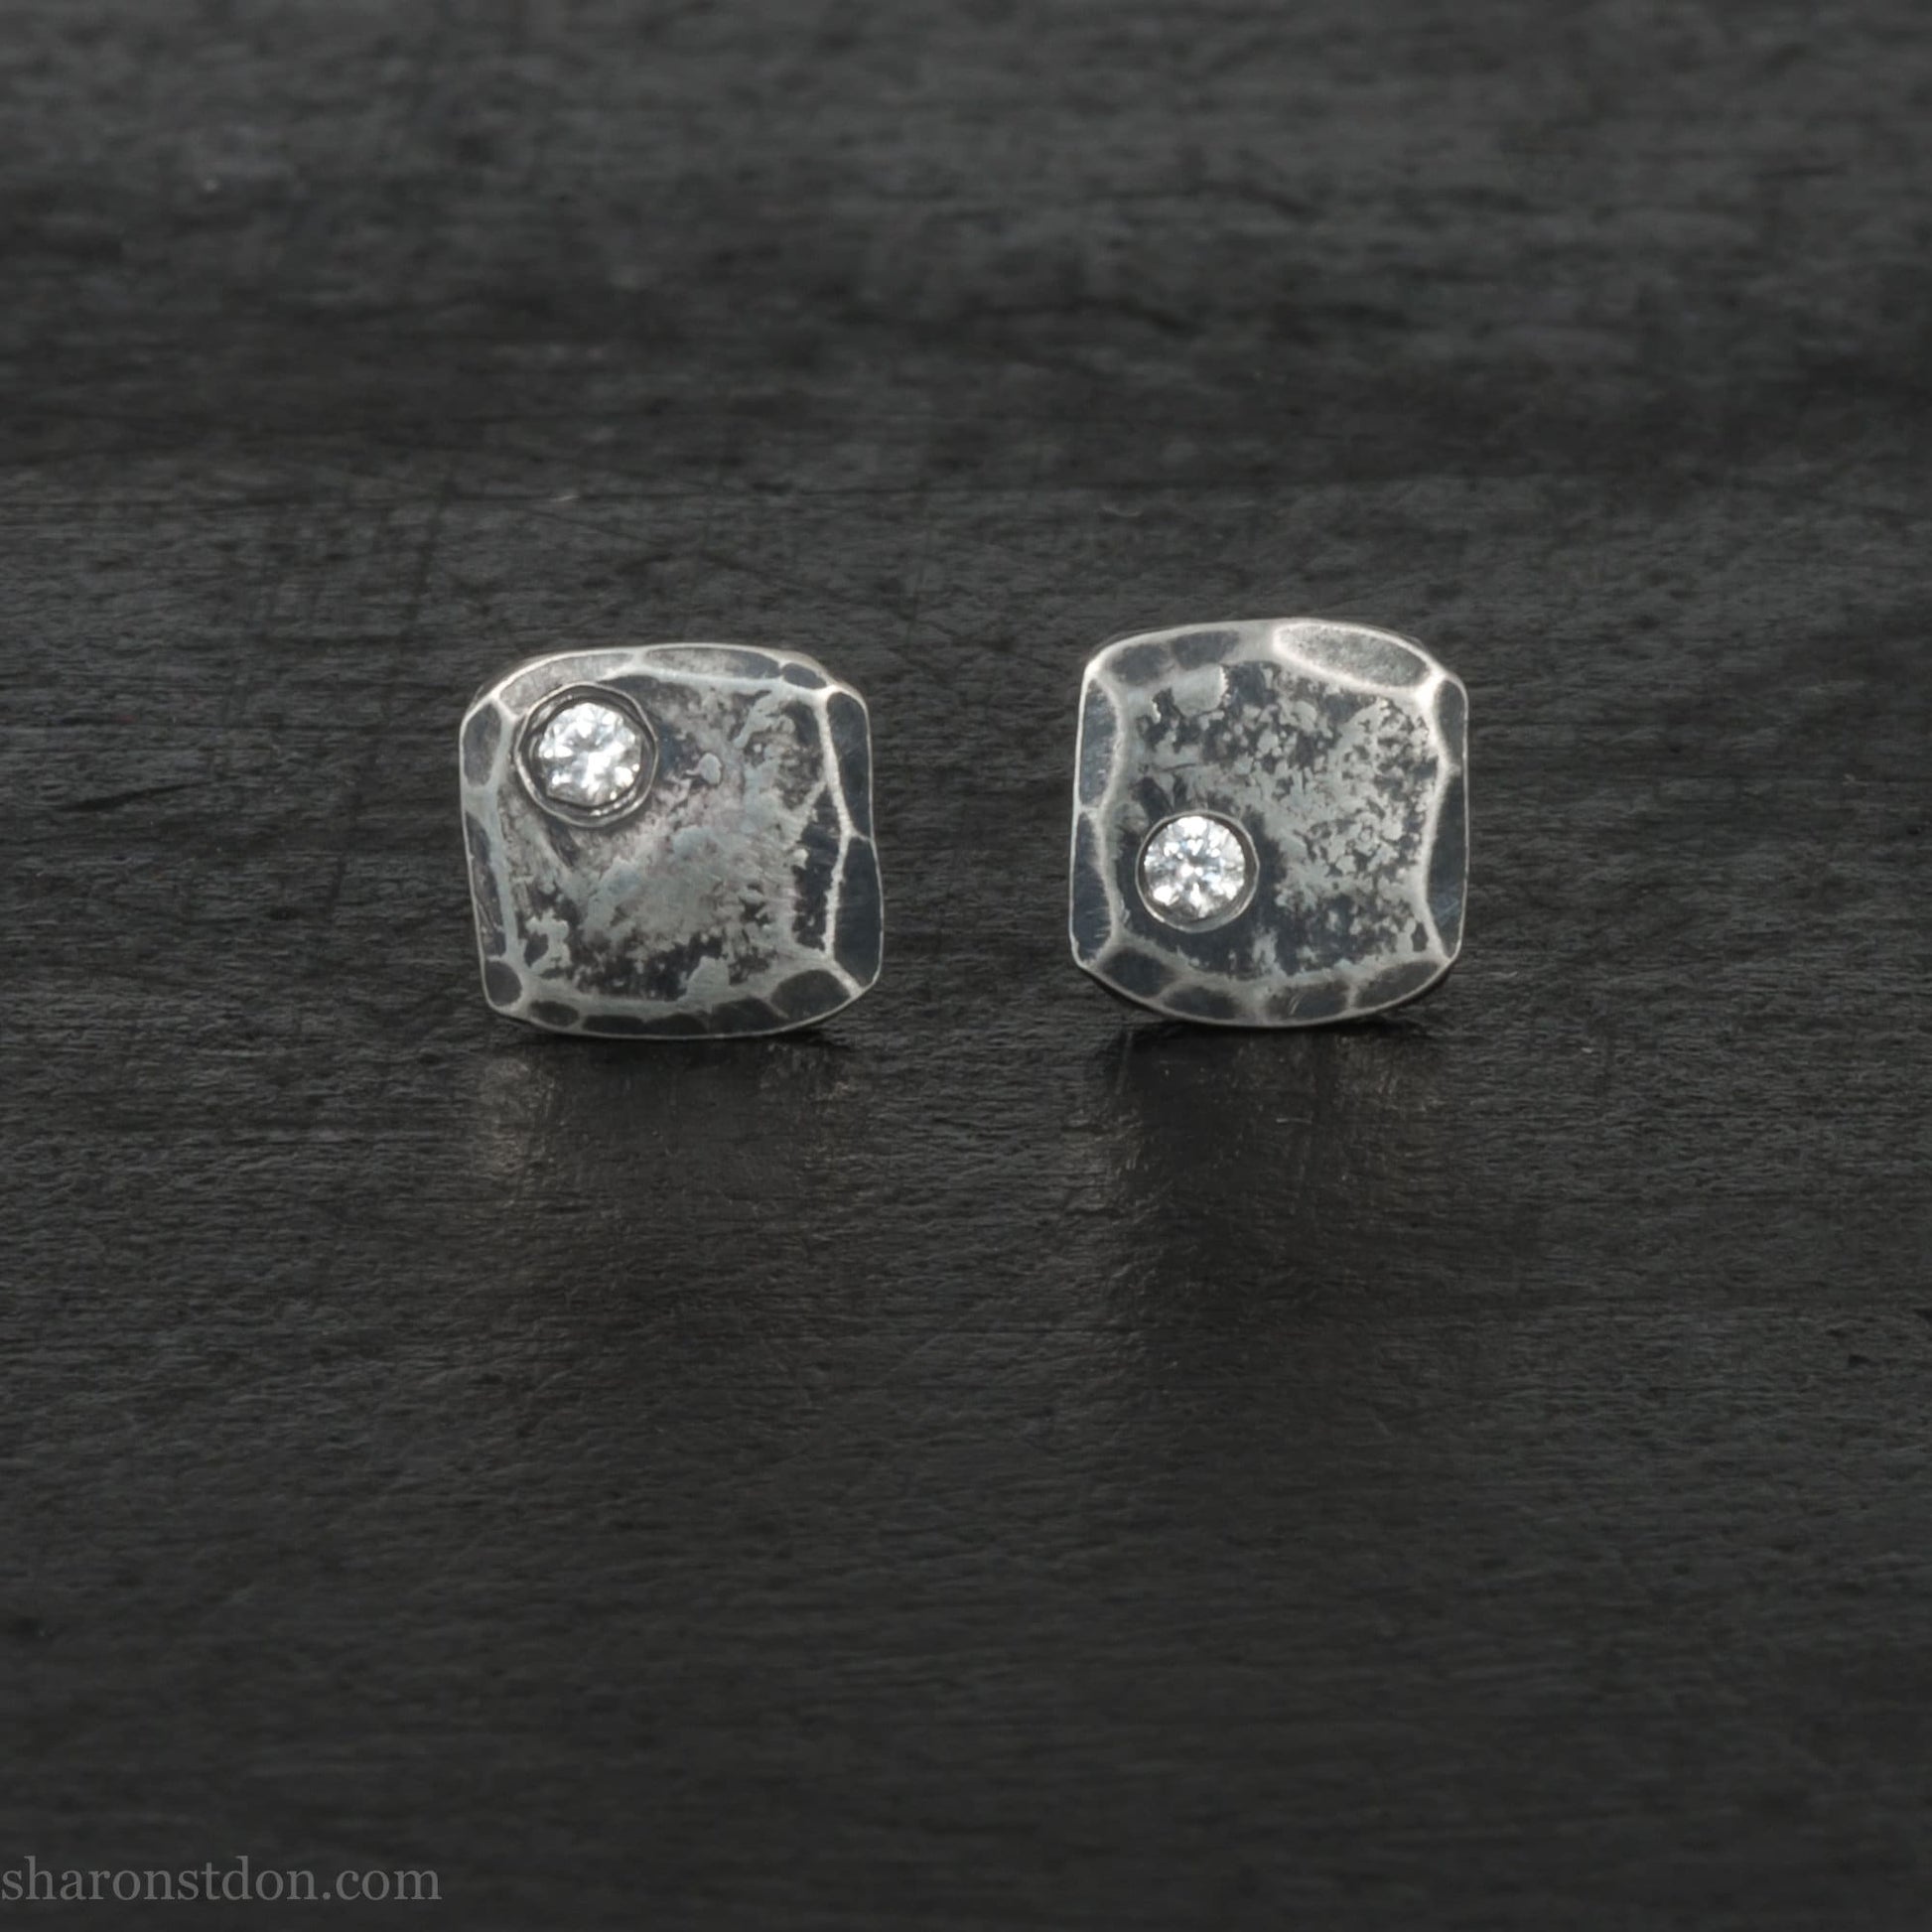 Imitation diamond stud earrings for men or women, non binary | 7mm square, 925 sterling silver studs with antique finish